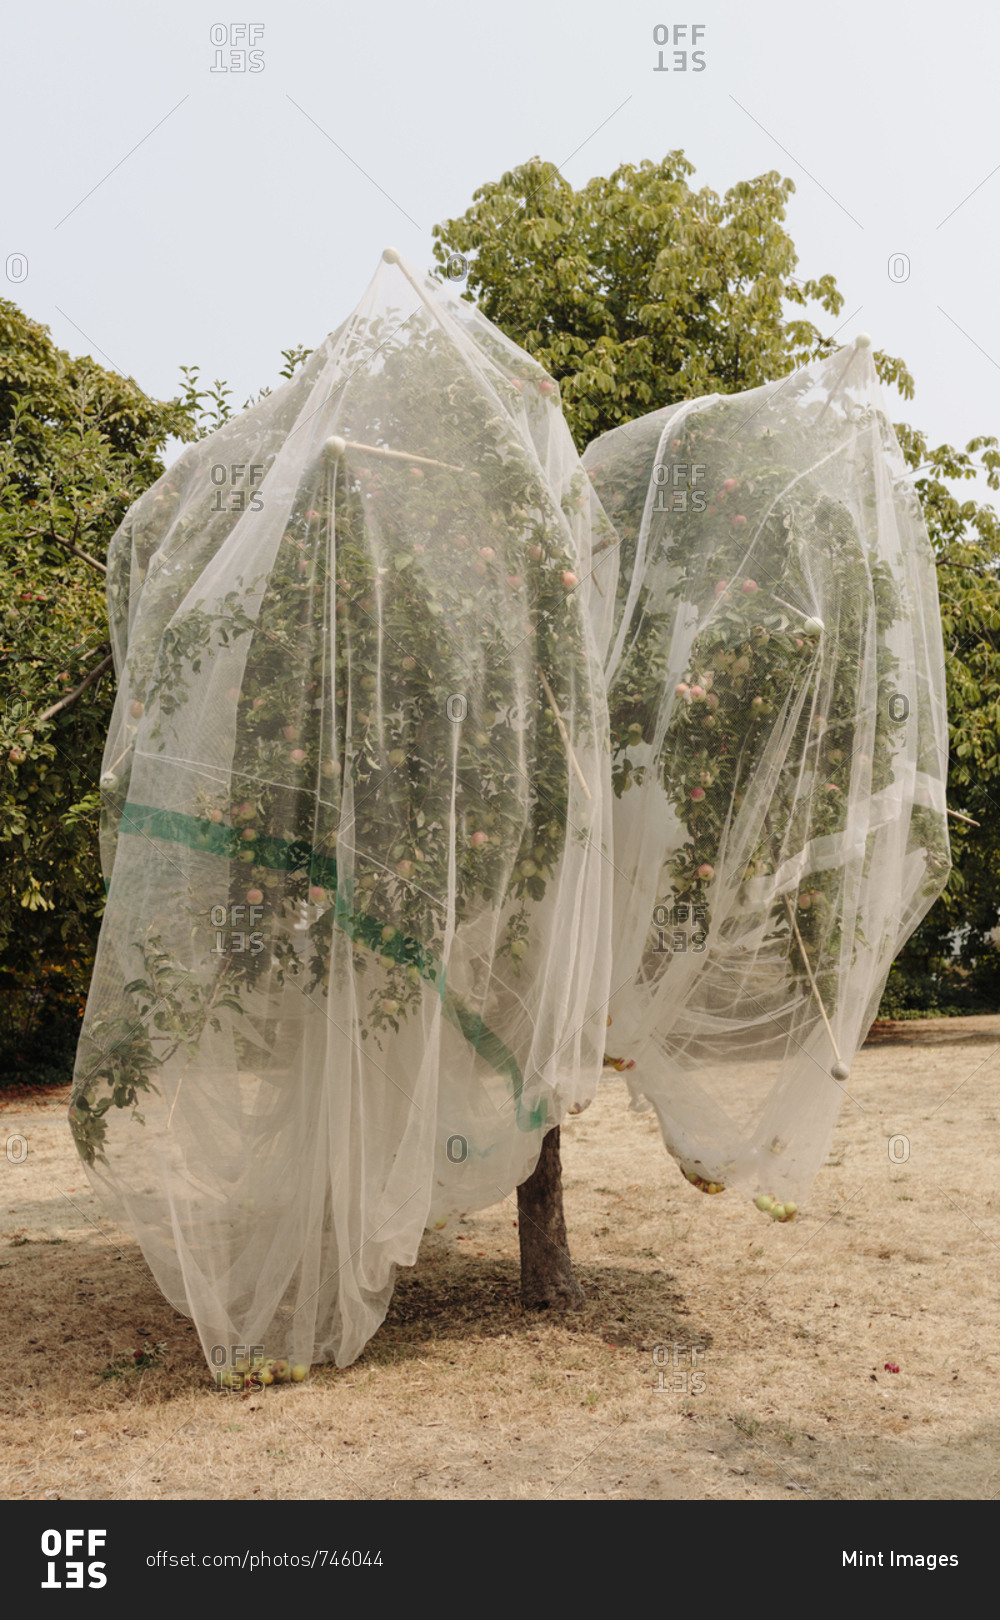 Protective mesh fabric covering apple trees bearing young fruit in summer in a commercial orchard. Pesticide-free farming and food production.